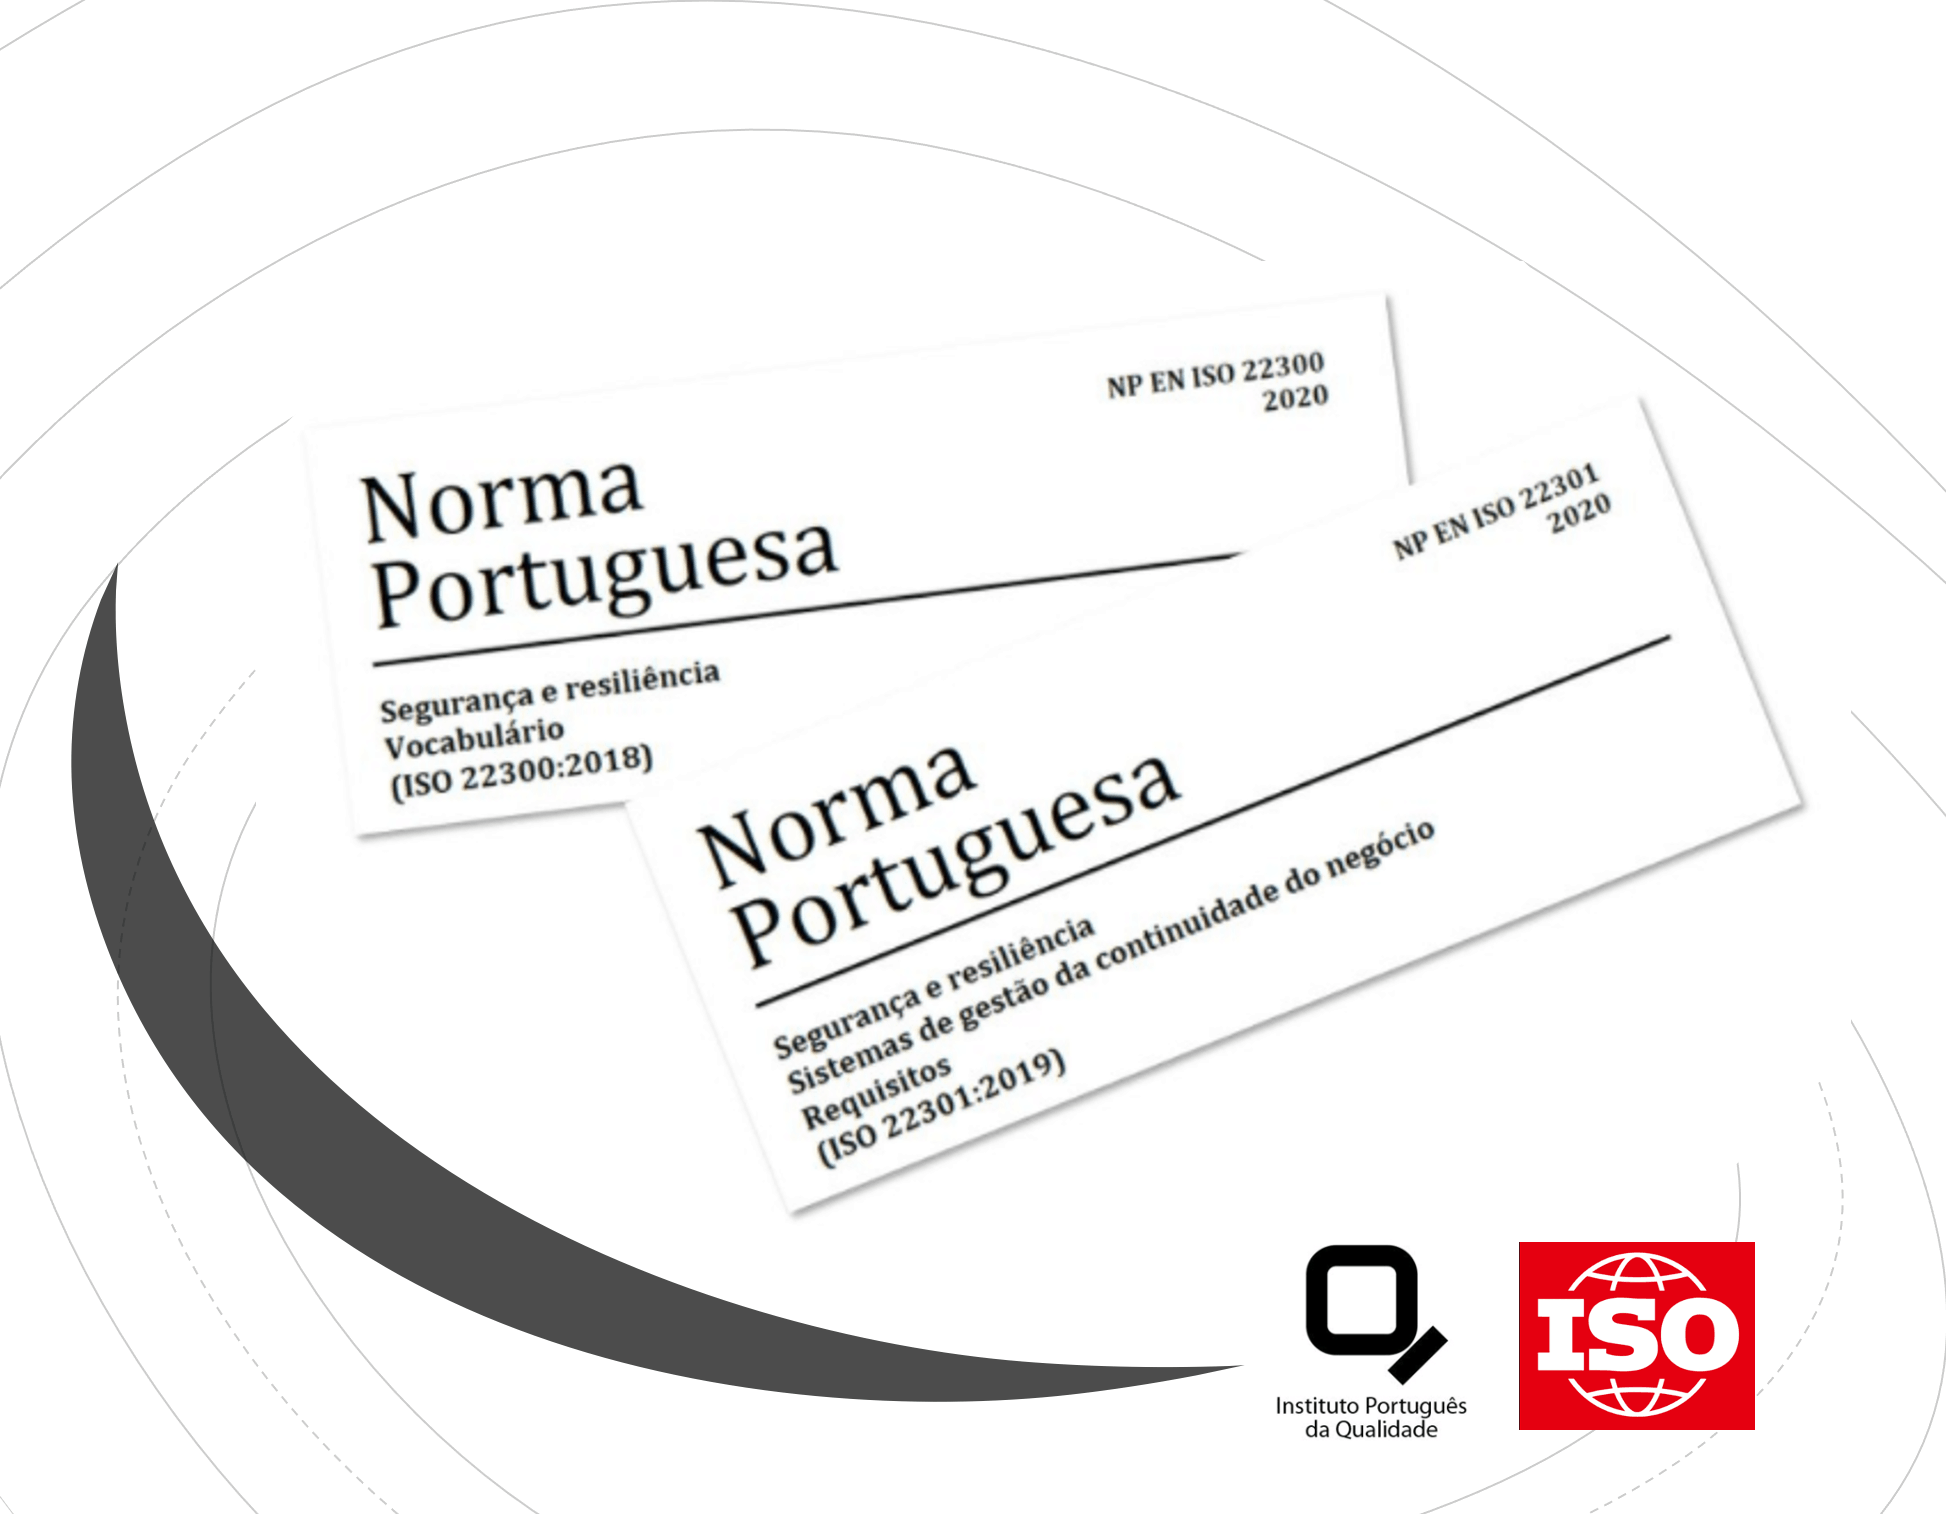 ISO standards published in Portuguese